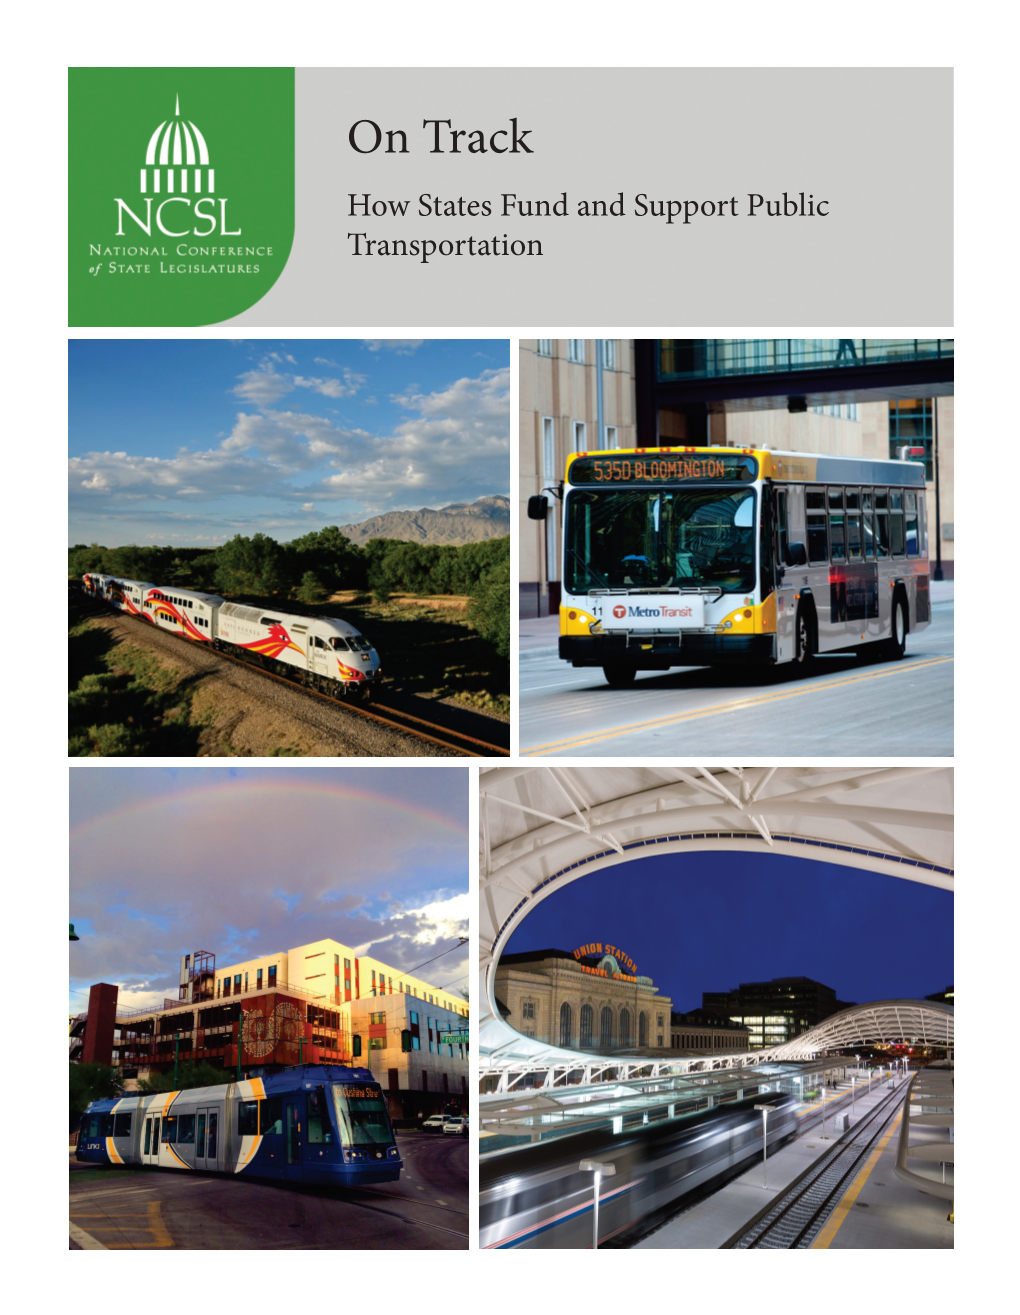 On Track: How States Fund and Support Public Transportation © 2015 National Conference of State Legislatures Iii List of Figures and Tables